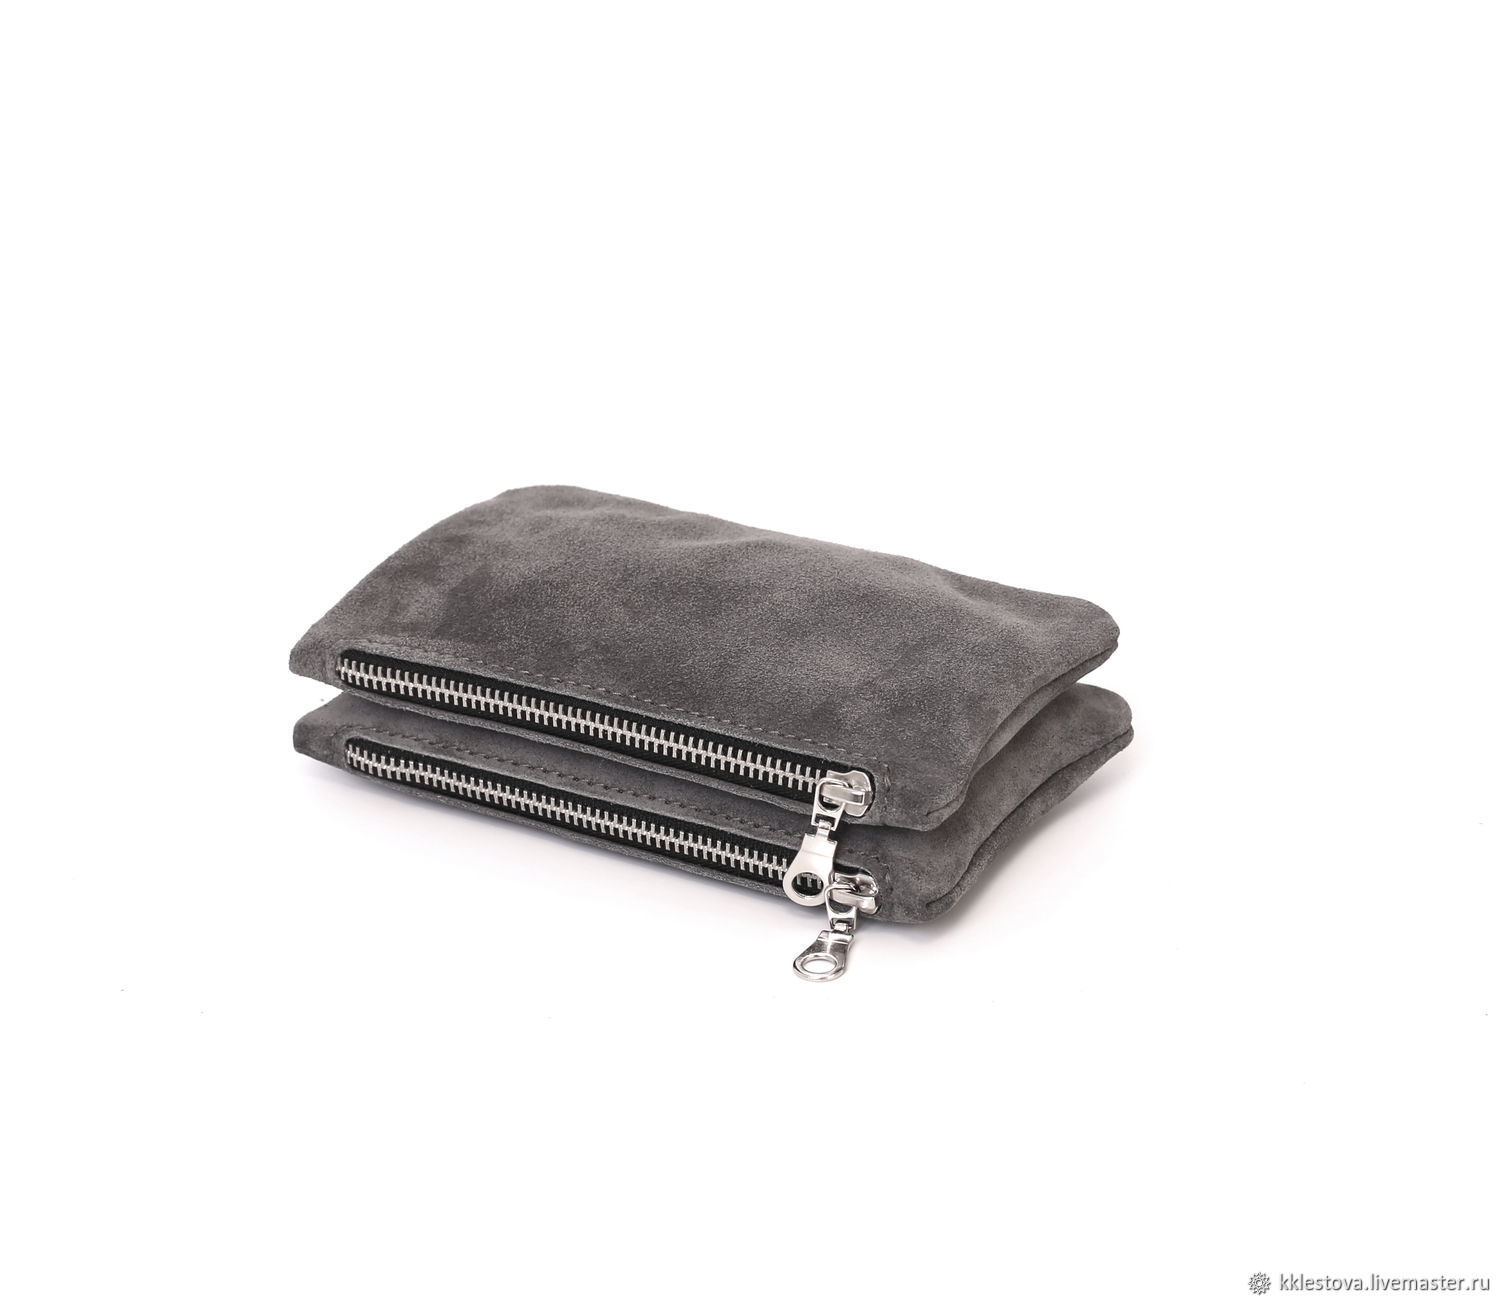 Double grey suede Wallet Pocket cosmetic Bag organizer Clutch leather, Wallets, Moscow,  Фото №1